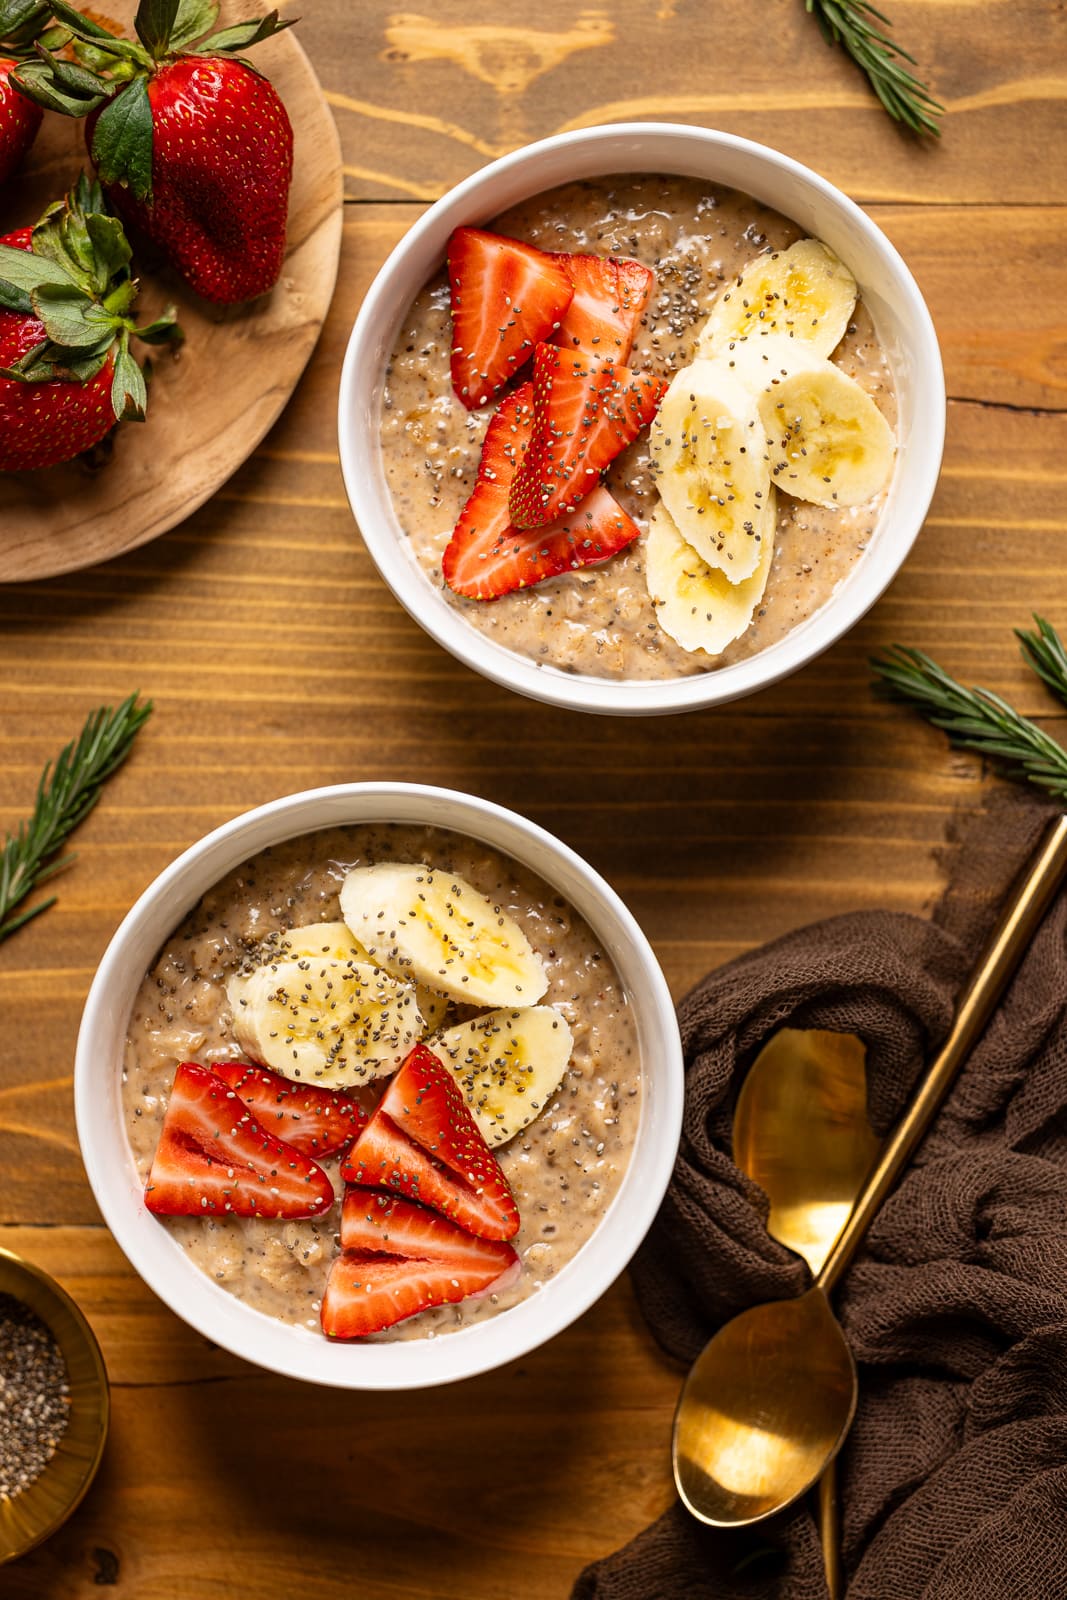 Two bowls of oatmeal with a side of fruit and a spoon on brown wood table.